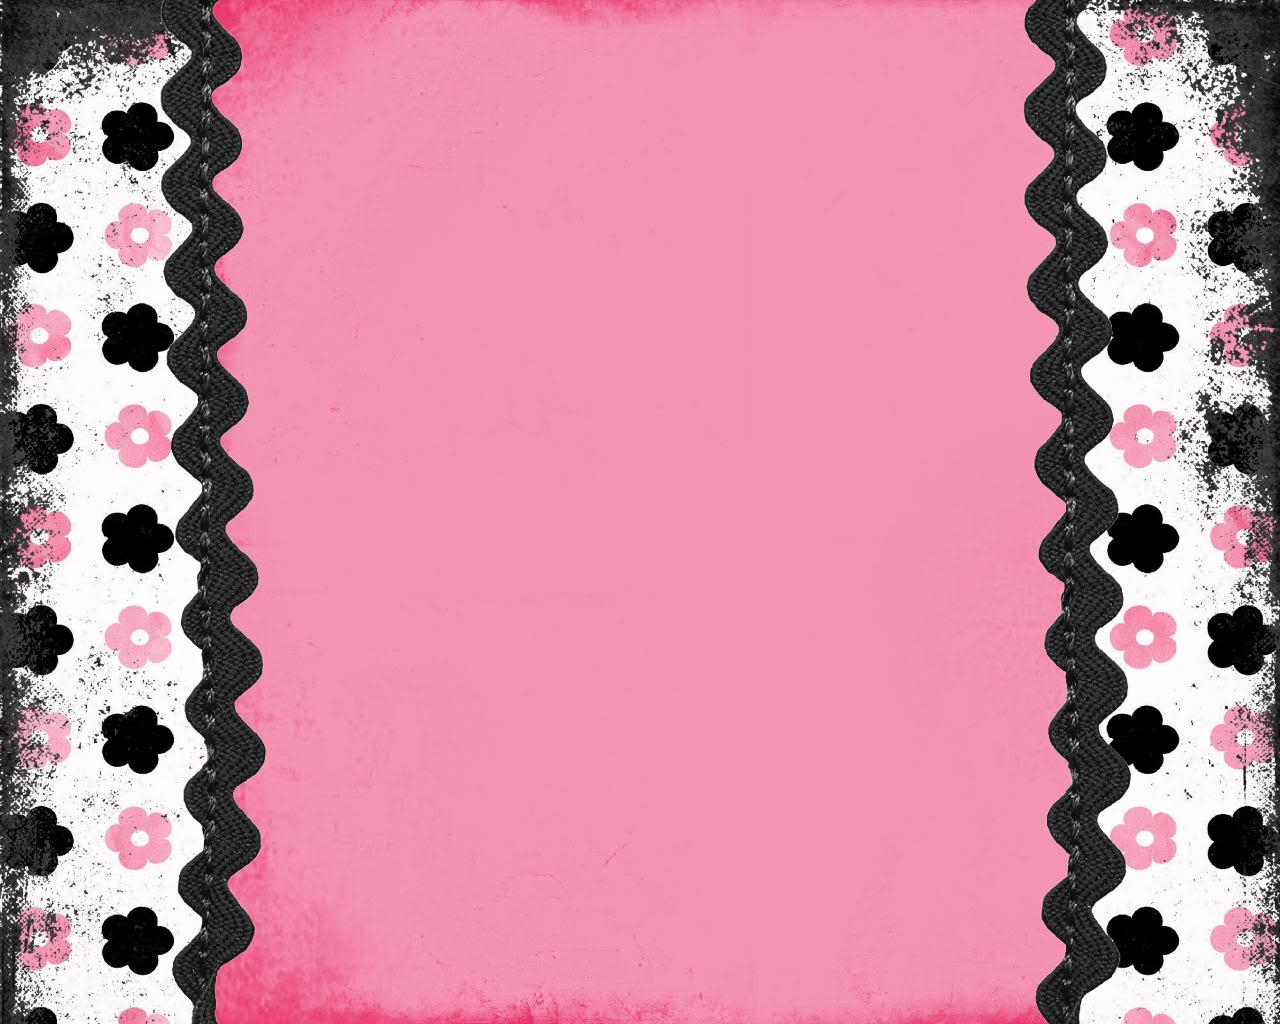 Roo&;s Creations & Designs: pink & black